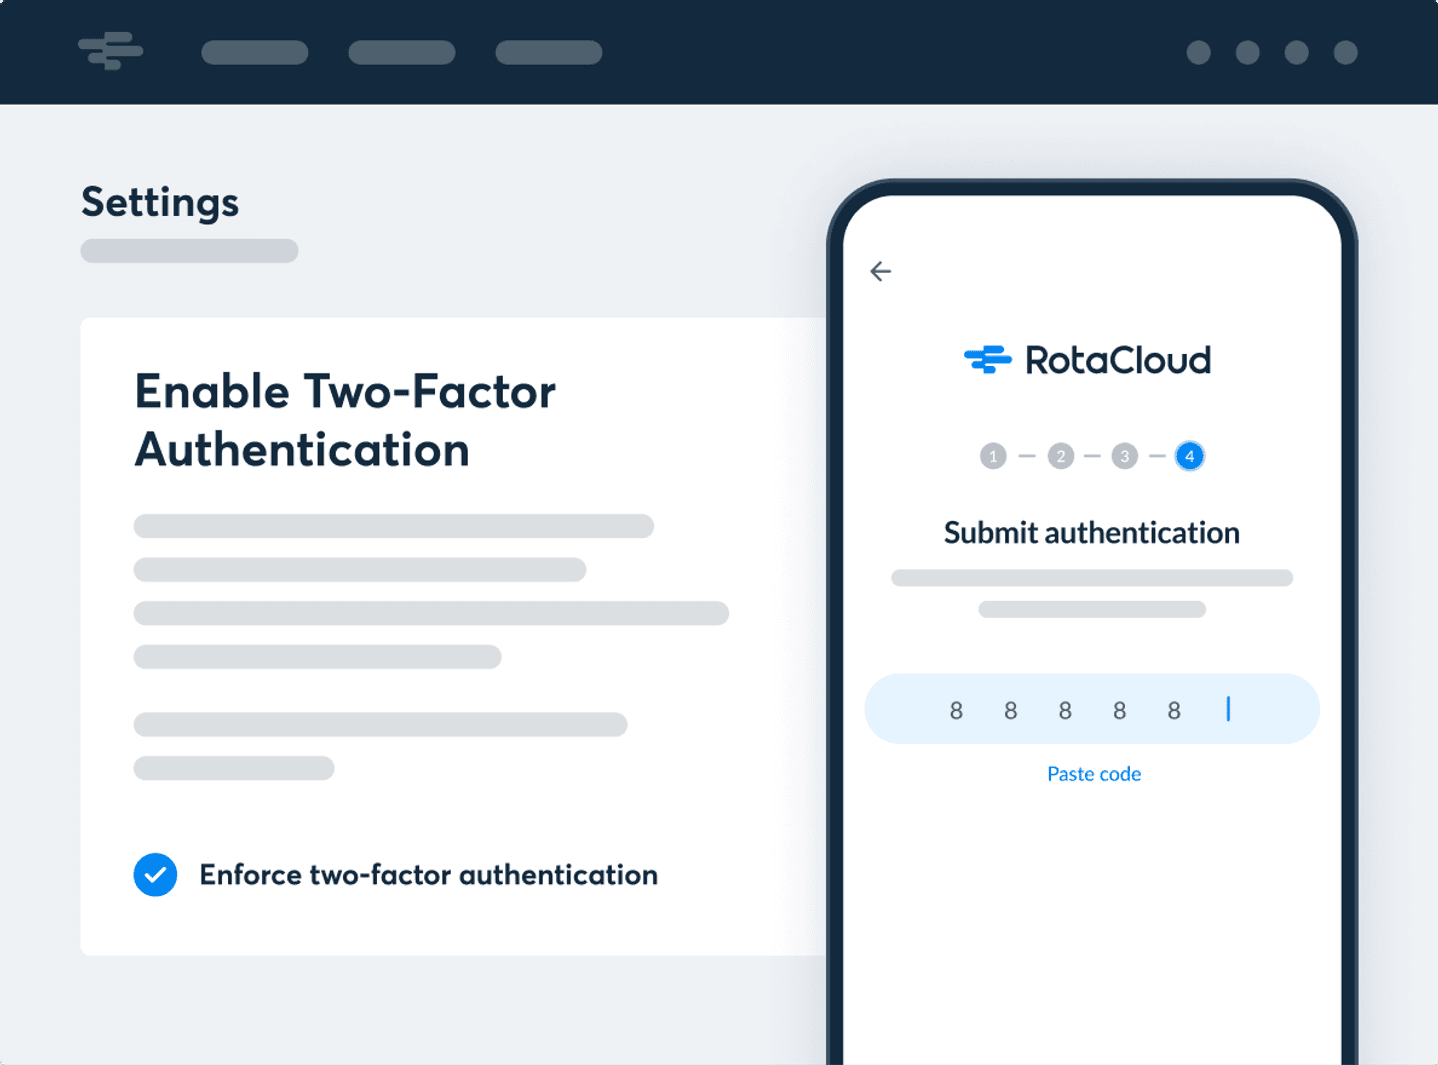 A screenshot of a settings page in RotaCloud, giving the option of enabling two factor authentication, and enforcing it, along with a preview of how to unlock the RotaCloud mobile app using two-factor authentication.